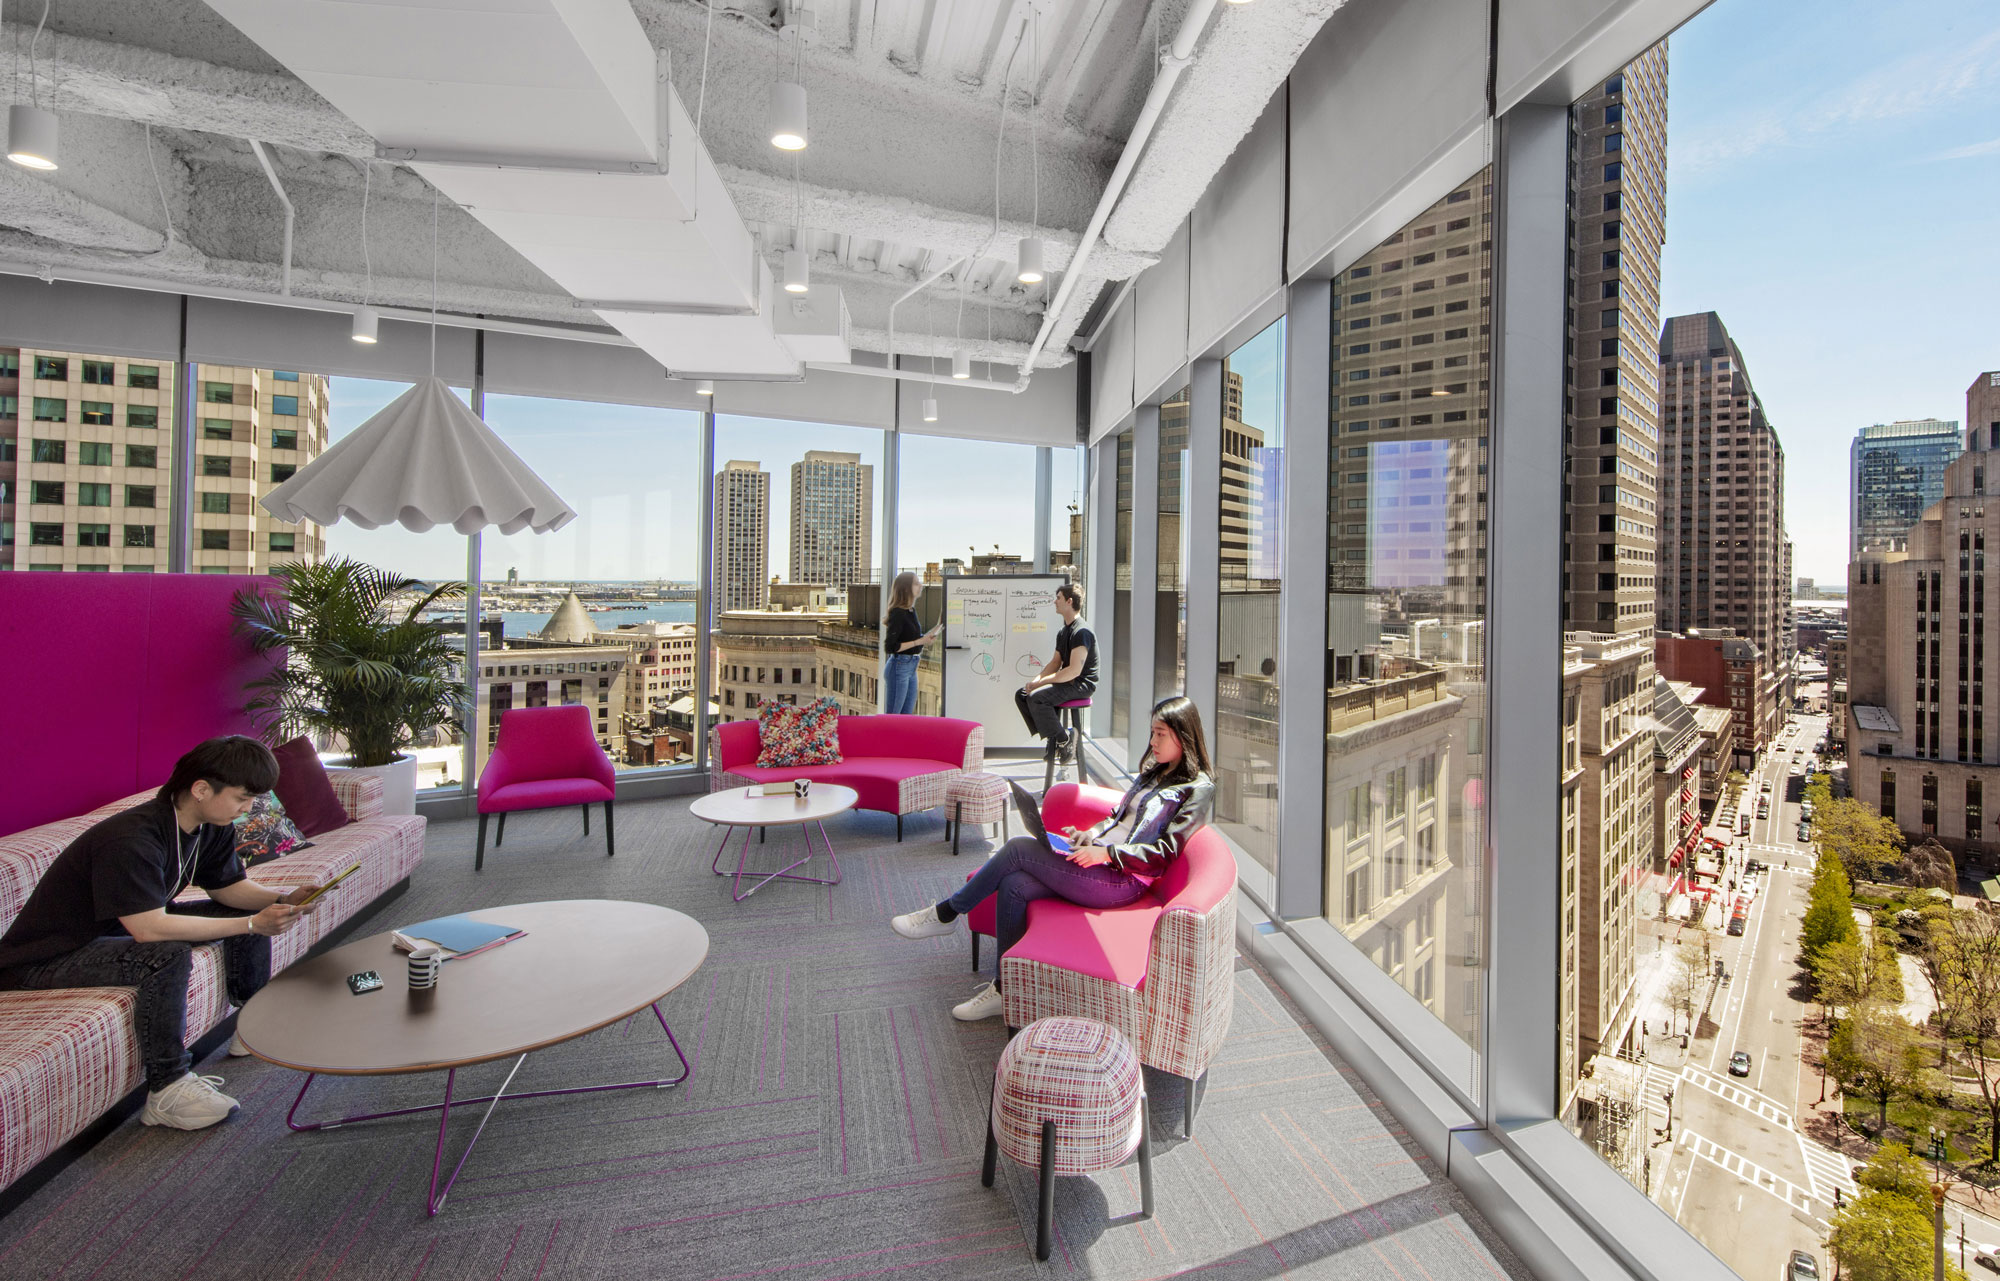 Touch-down work setting for casual meetings or brainstorming with views of Post Office Square